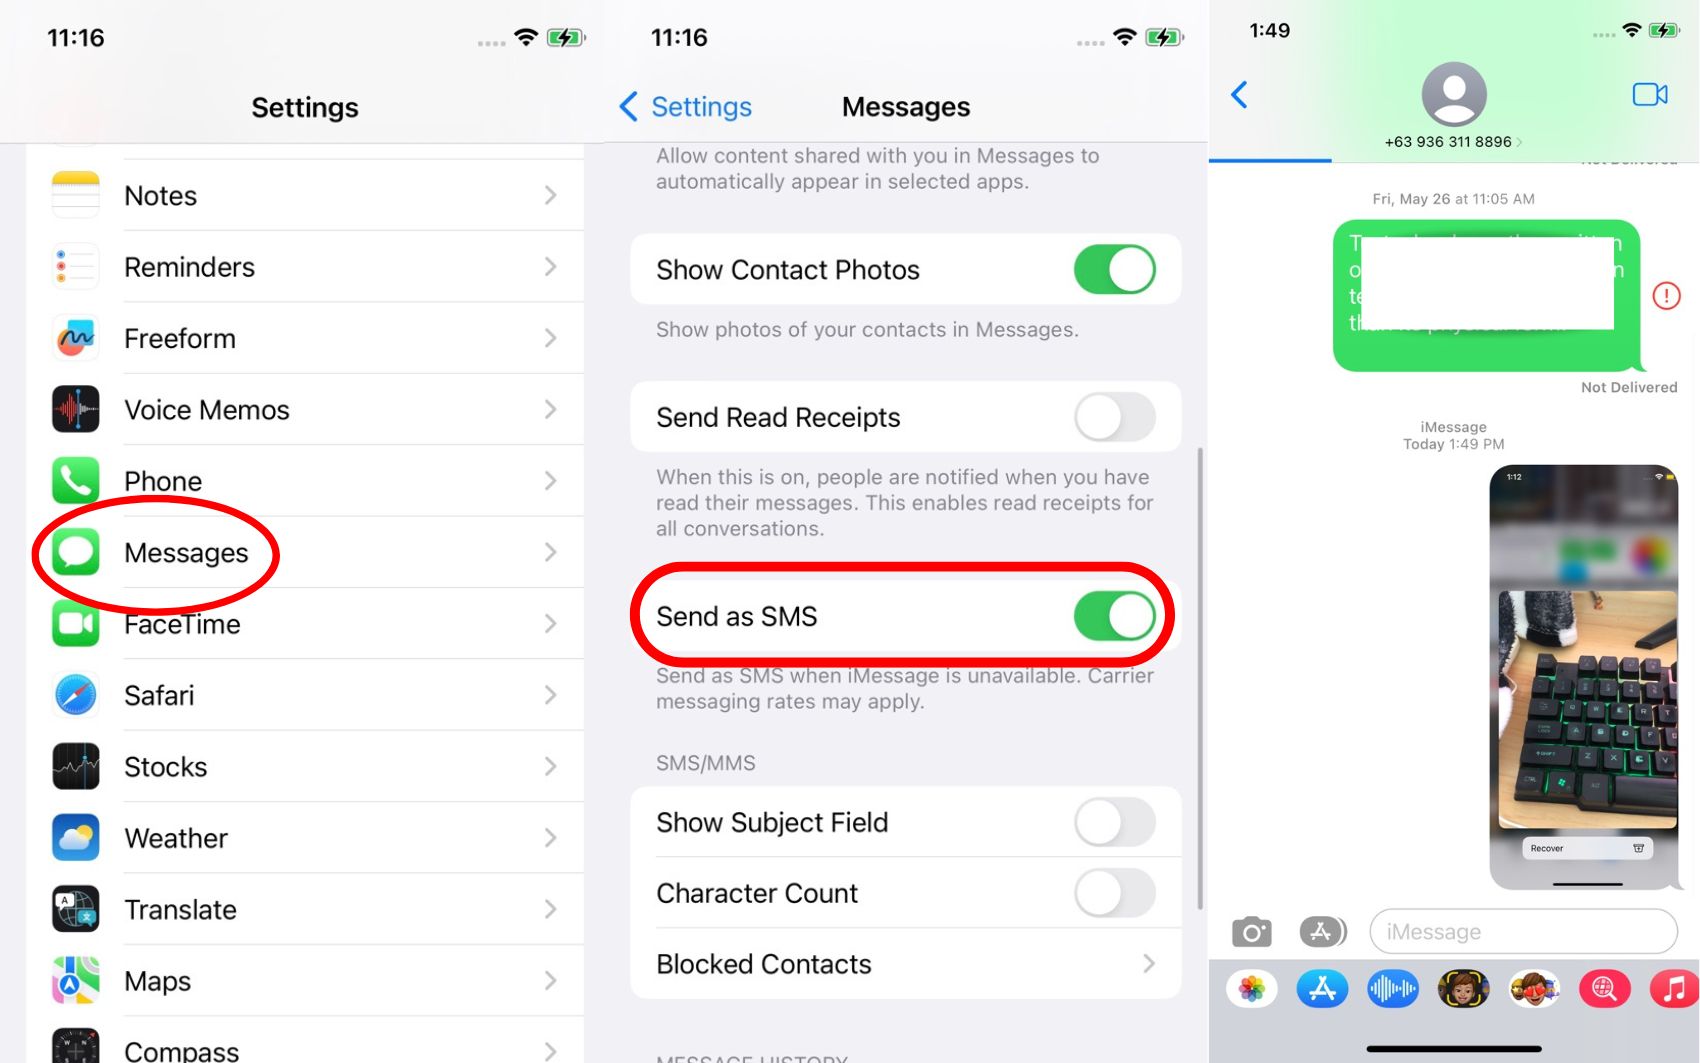 enable the send as sms feature on settings